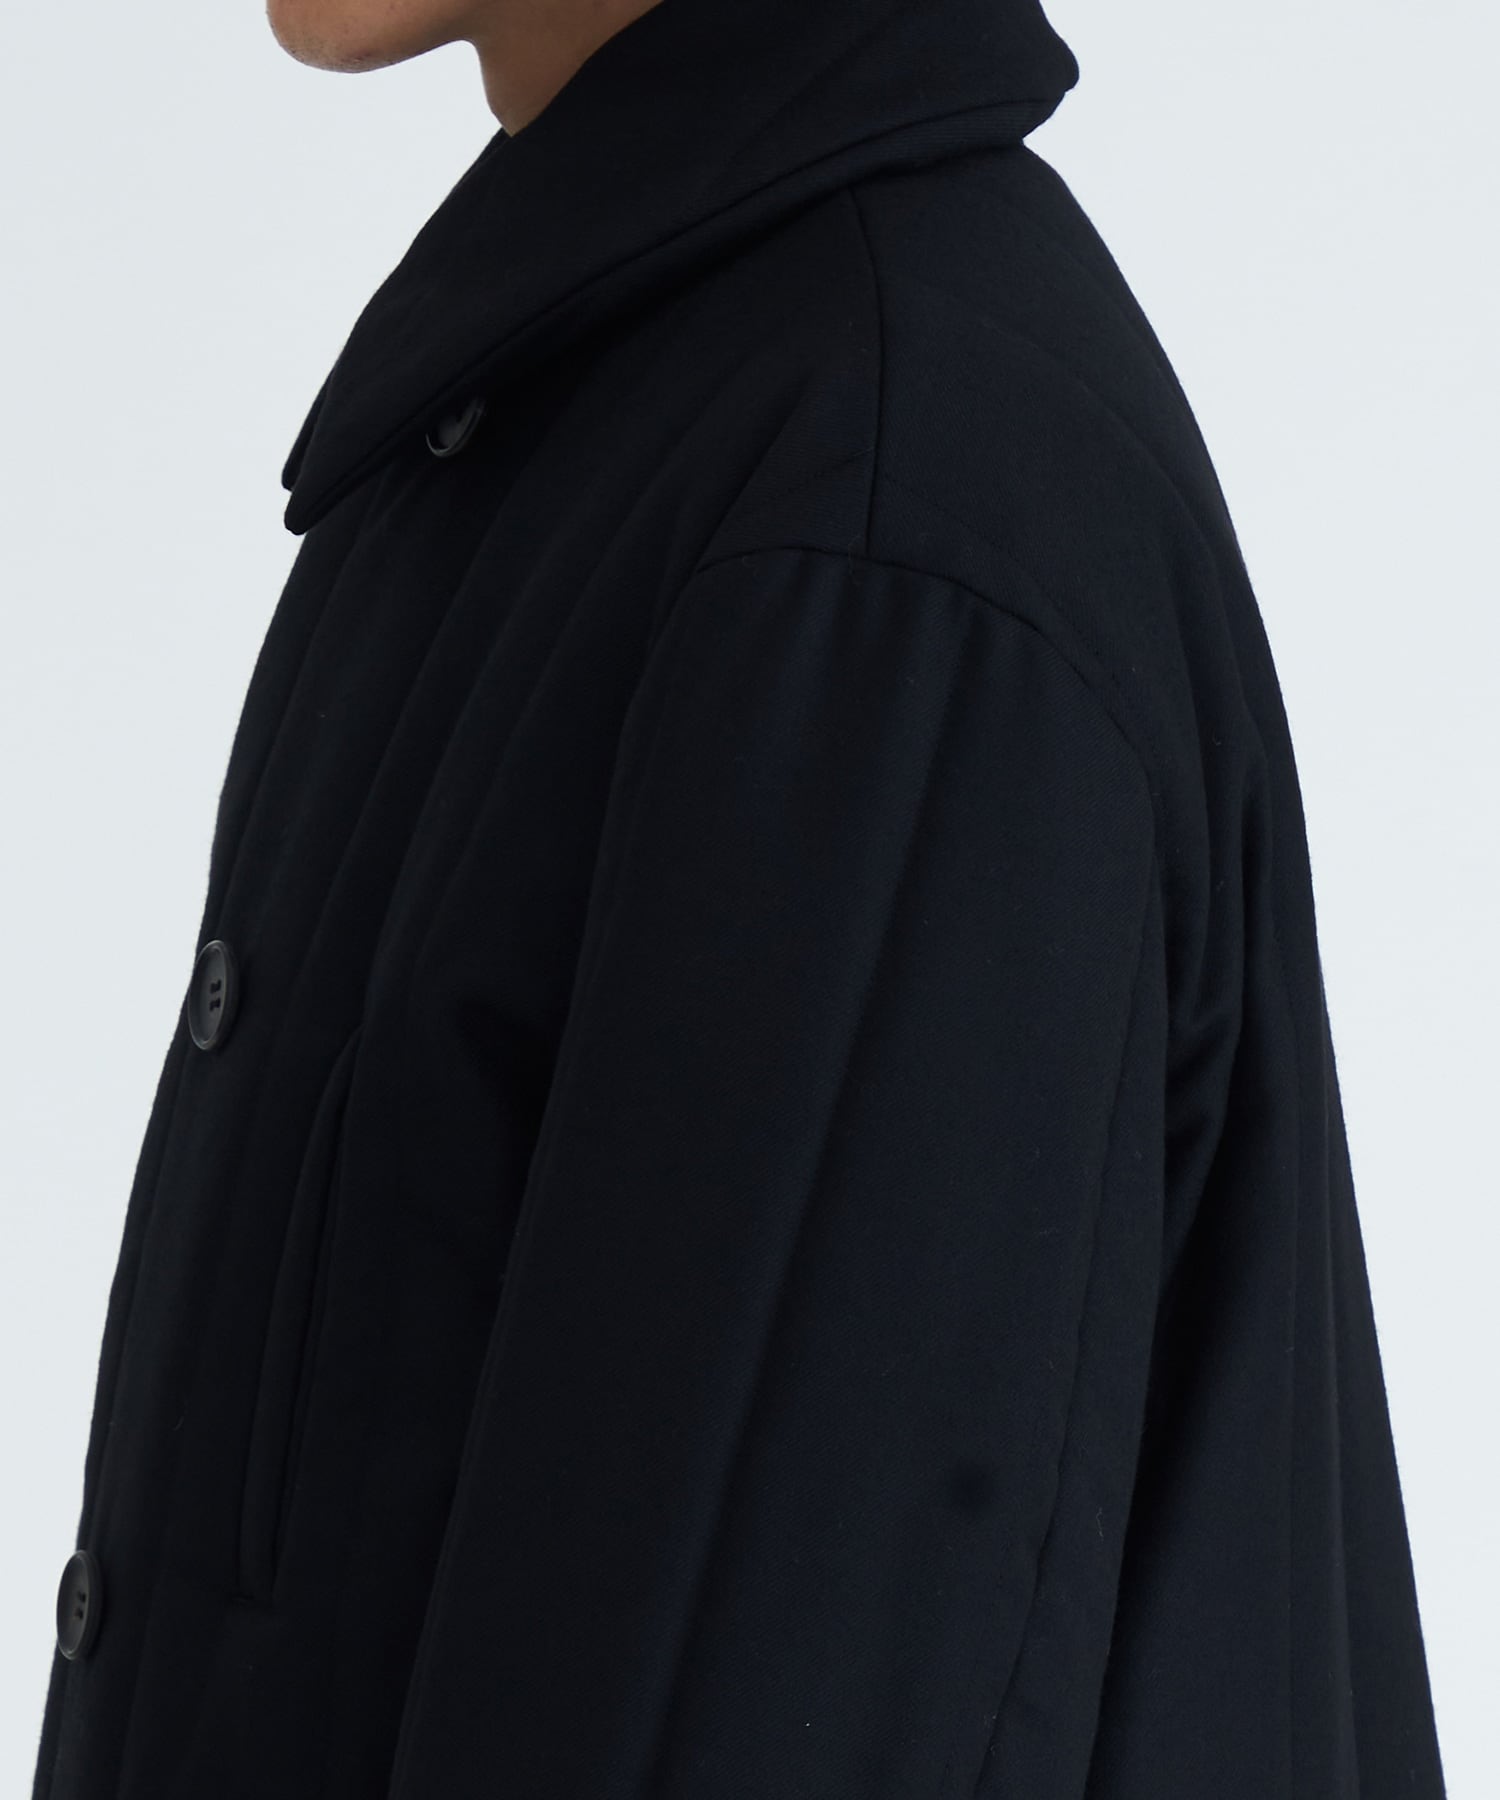 Wool Stripe Quilted Double-Breasted Coat MATSUFUJI